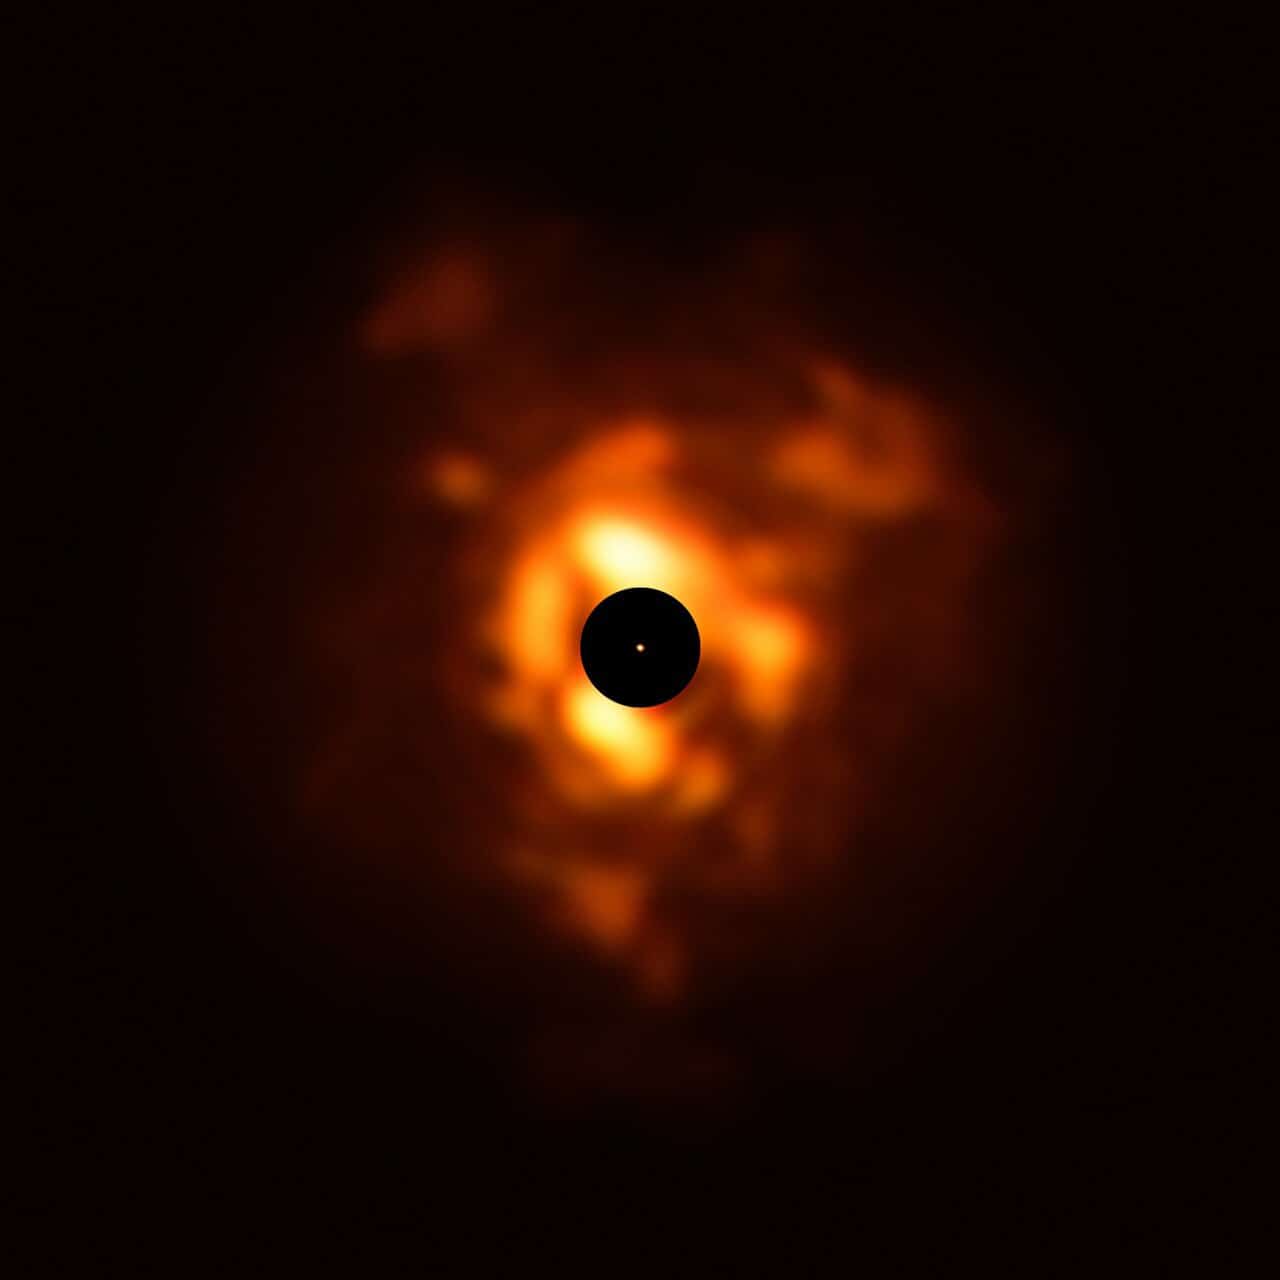 This image, obtained with the VISIR instrument on ESO’s Very Large Telescope, shows the infrared light being emitted by the dust surrounding Betelgeuse in December 2019. The clouds of dust, which resemble flames in this dramatic image, are formed when the star sheds its material back into space. The black disc obscures the star's centre and much of its surroundings, which are very bright and must be masked to allow the fainter dust plumes to be seen. The orange dot in the middle is the SPHERE image of Betelgeuse’s surface, which has a size close to that of Jupiter’s orbit. Credit: ESO/P. Kervella/M. Montargès et al., Acknowledgement: Eric Pantin